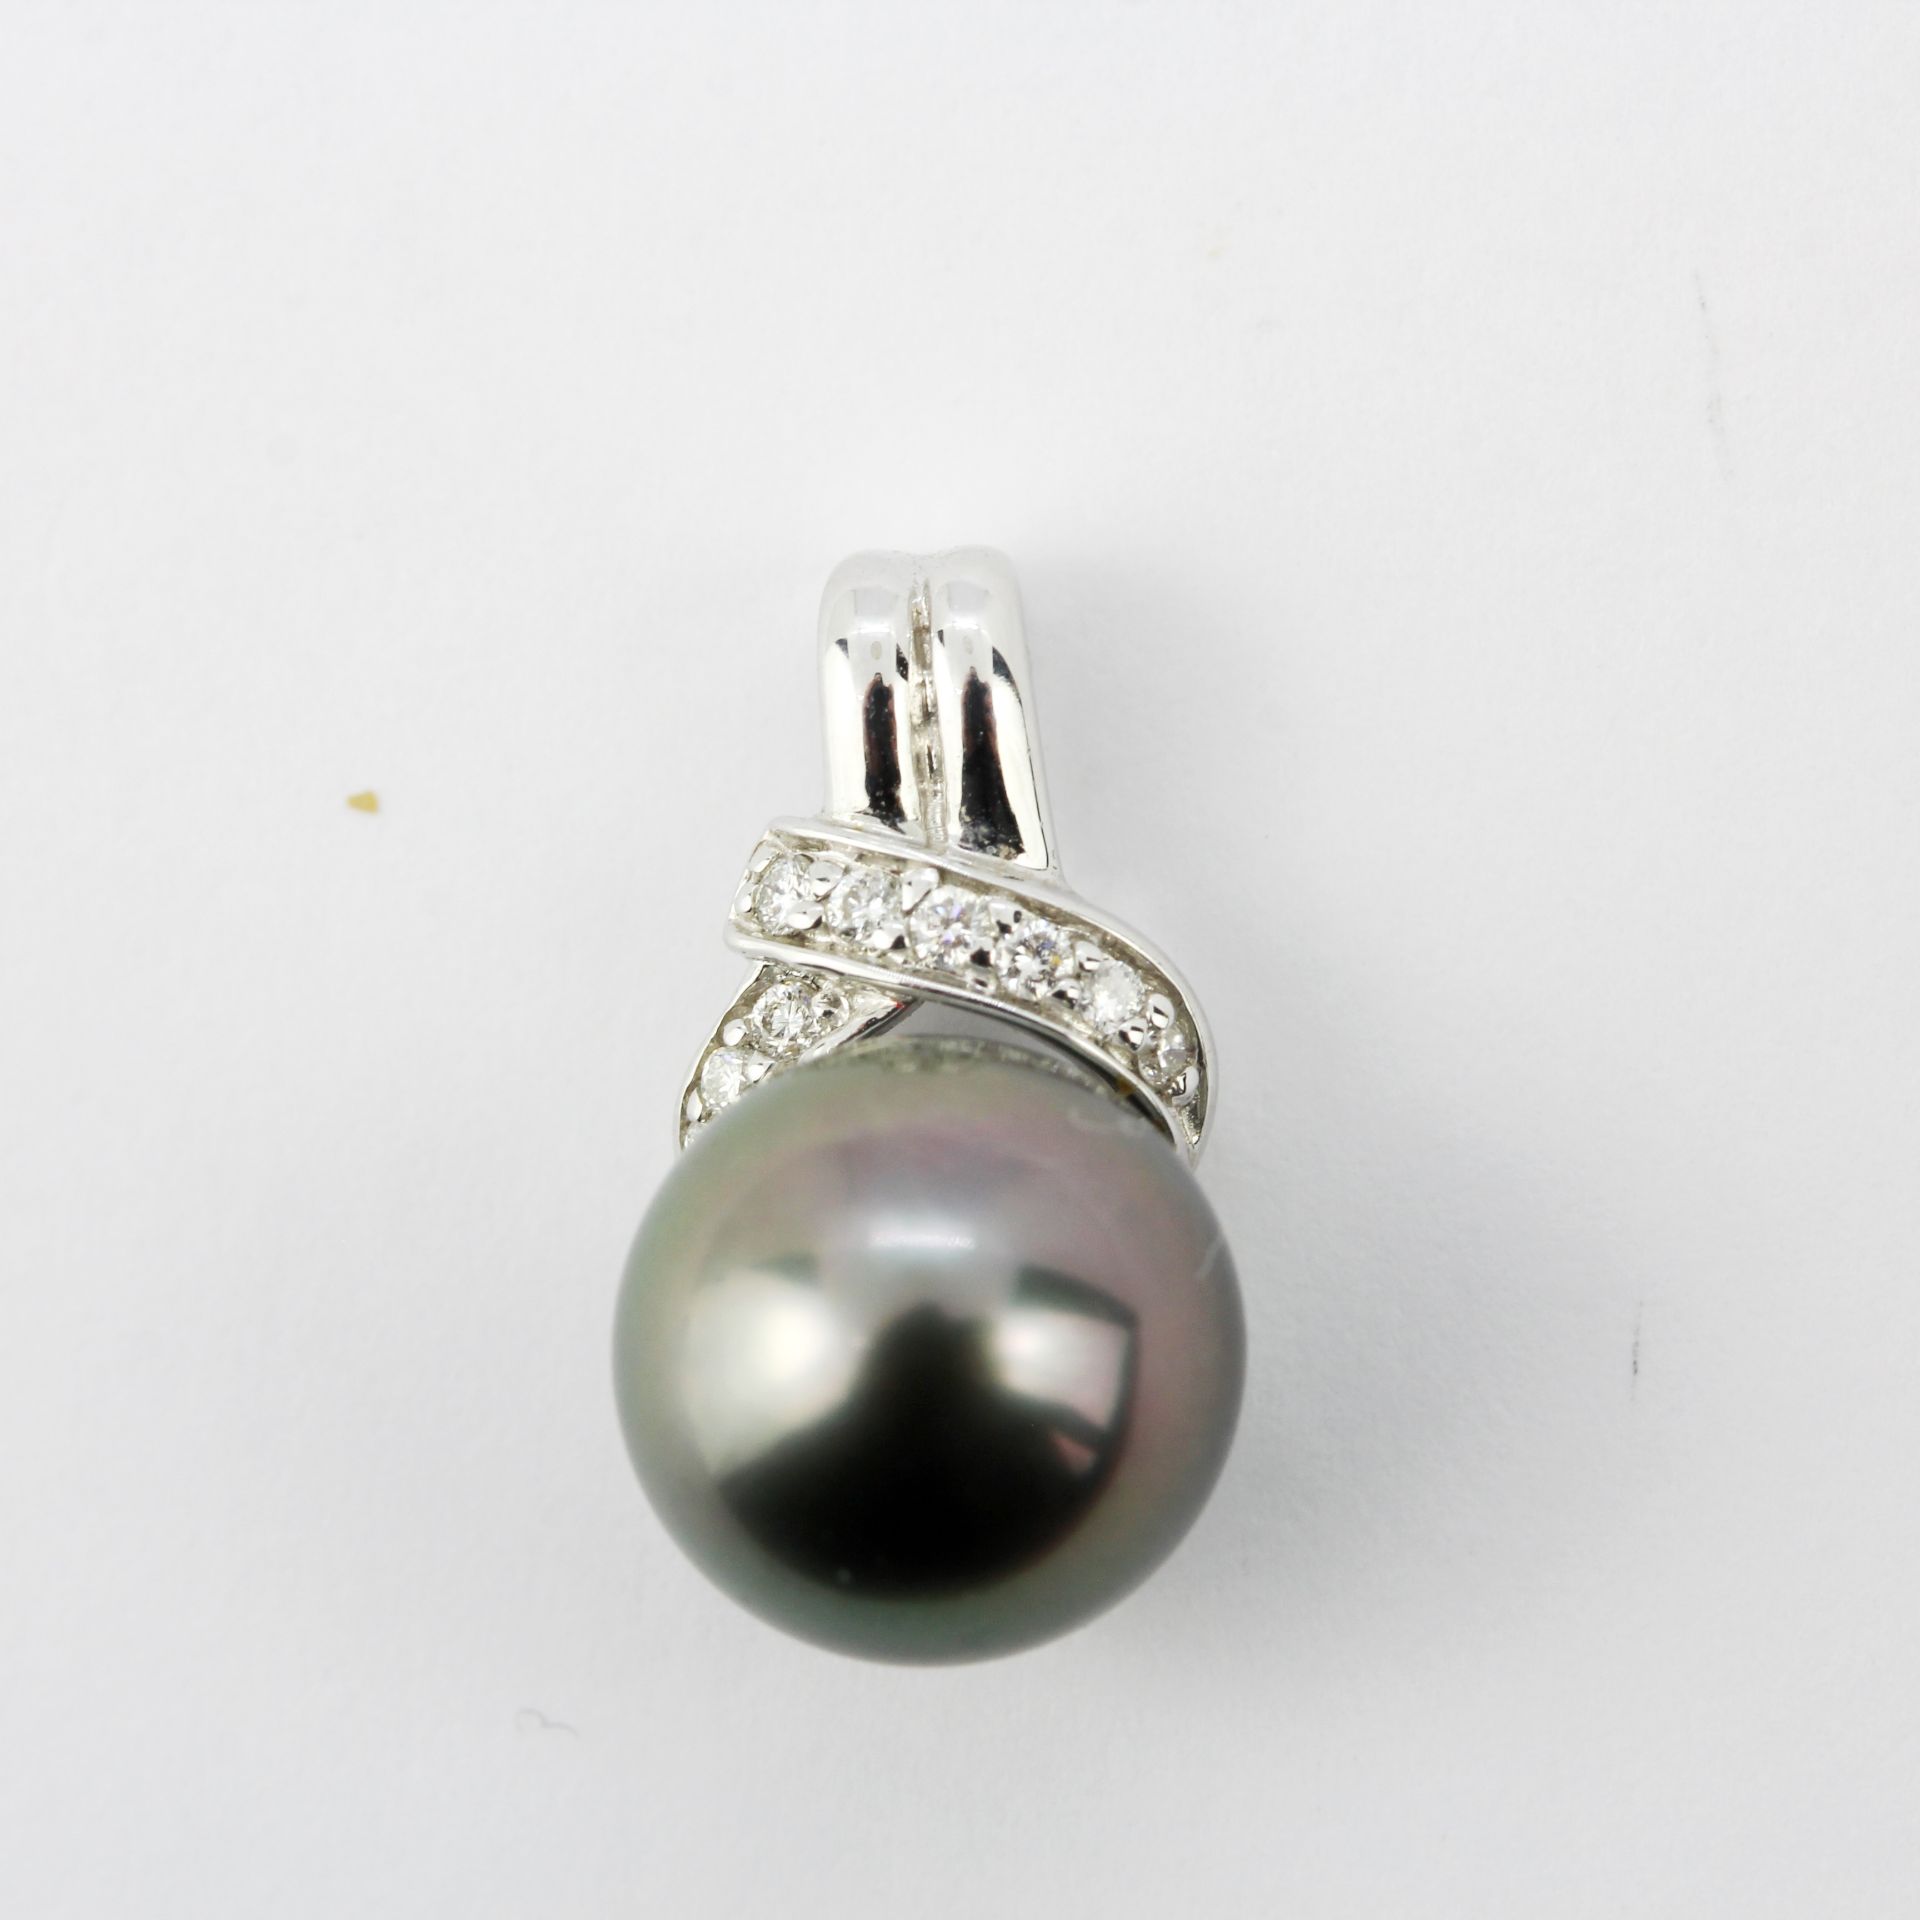 A 9t white gold pendant set with a black Tahitian pearl and diamonds, L. 5.6cm.